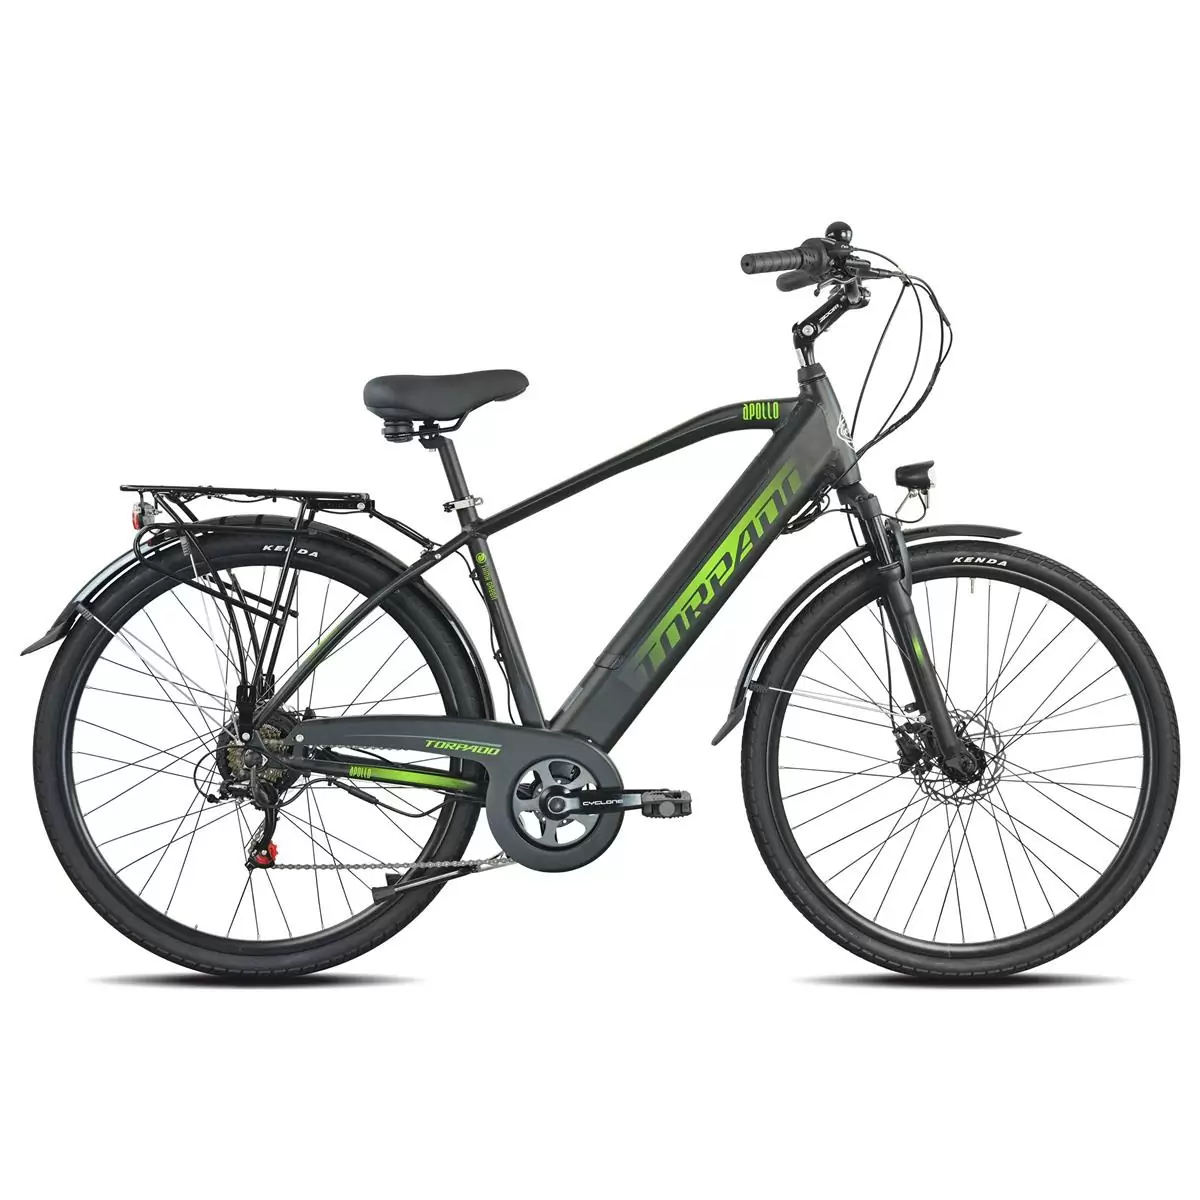 Apollo T245 28'' 7s Bafang 418Wh Black/Green Size M - image